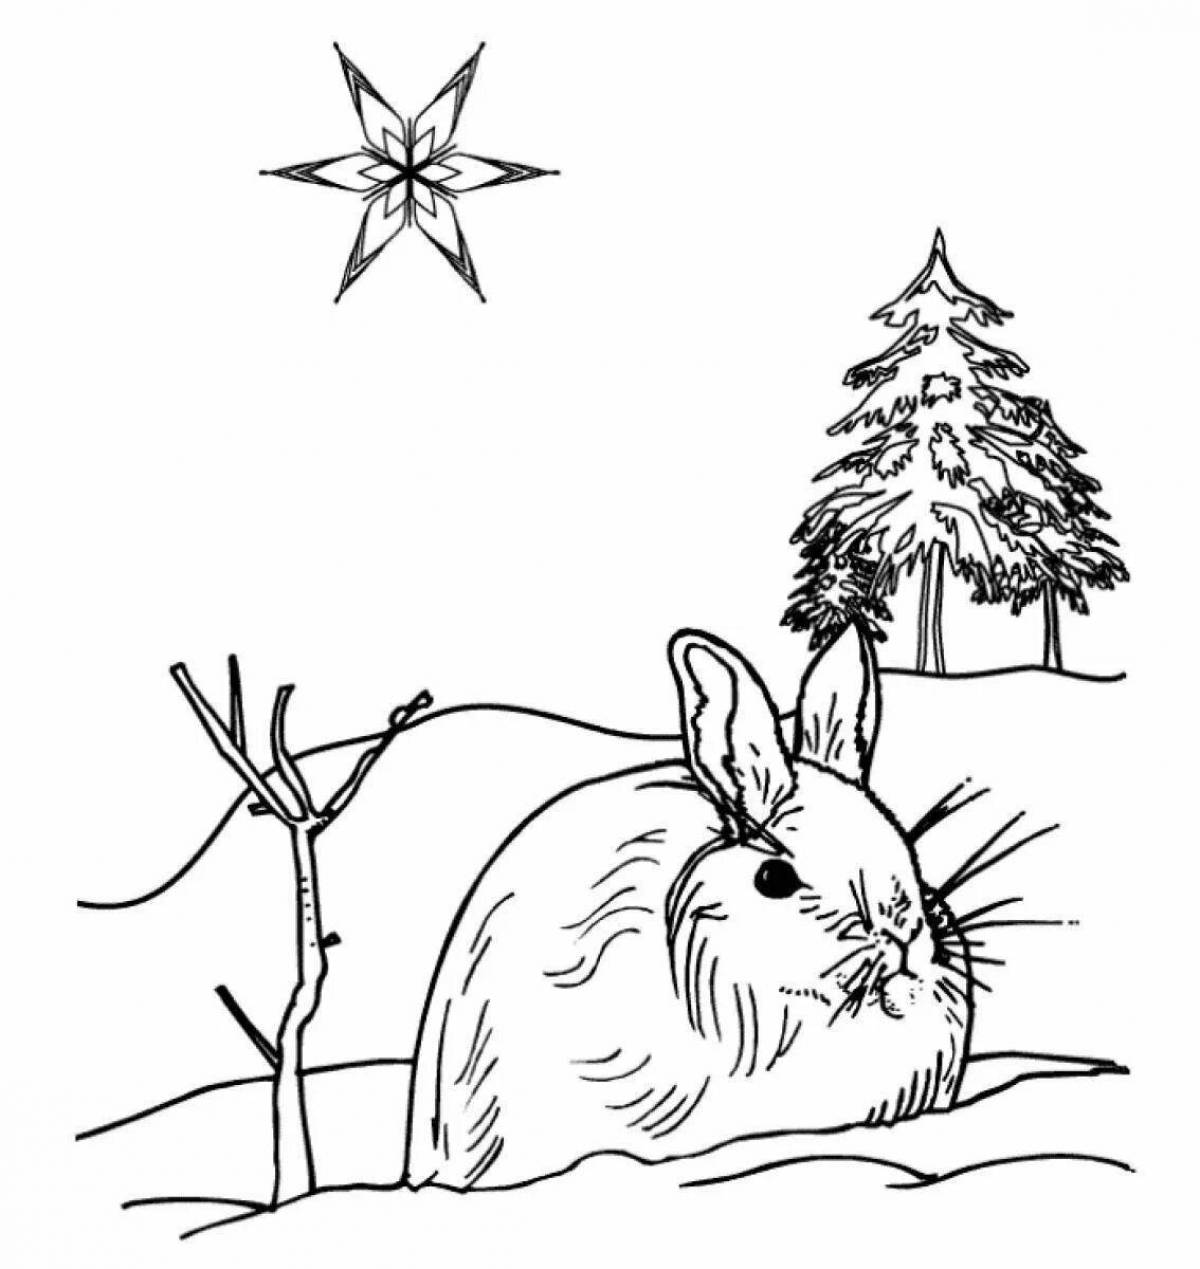 Coloring book glowing winter forest with animals